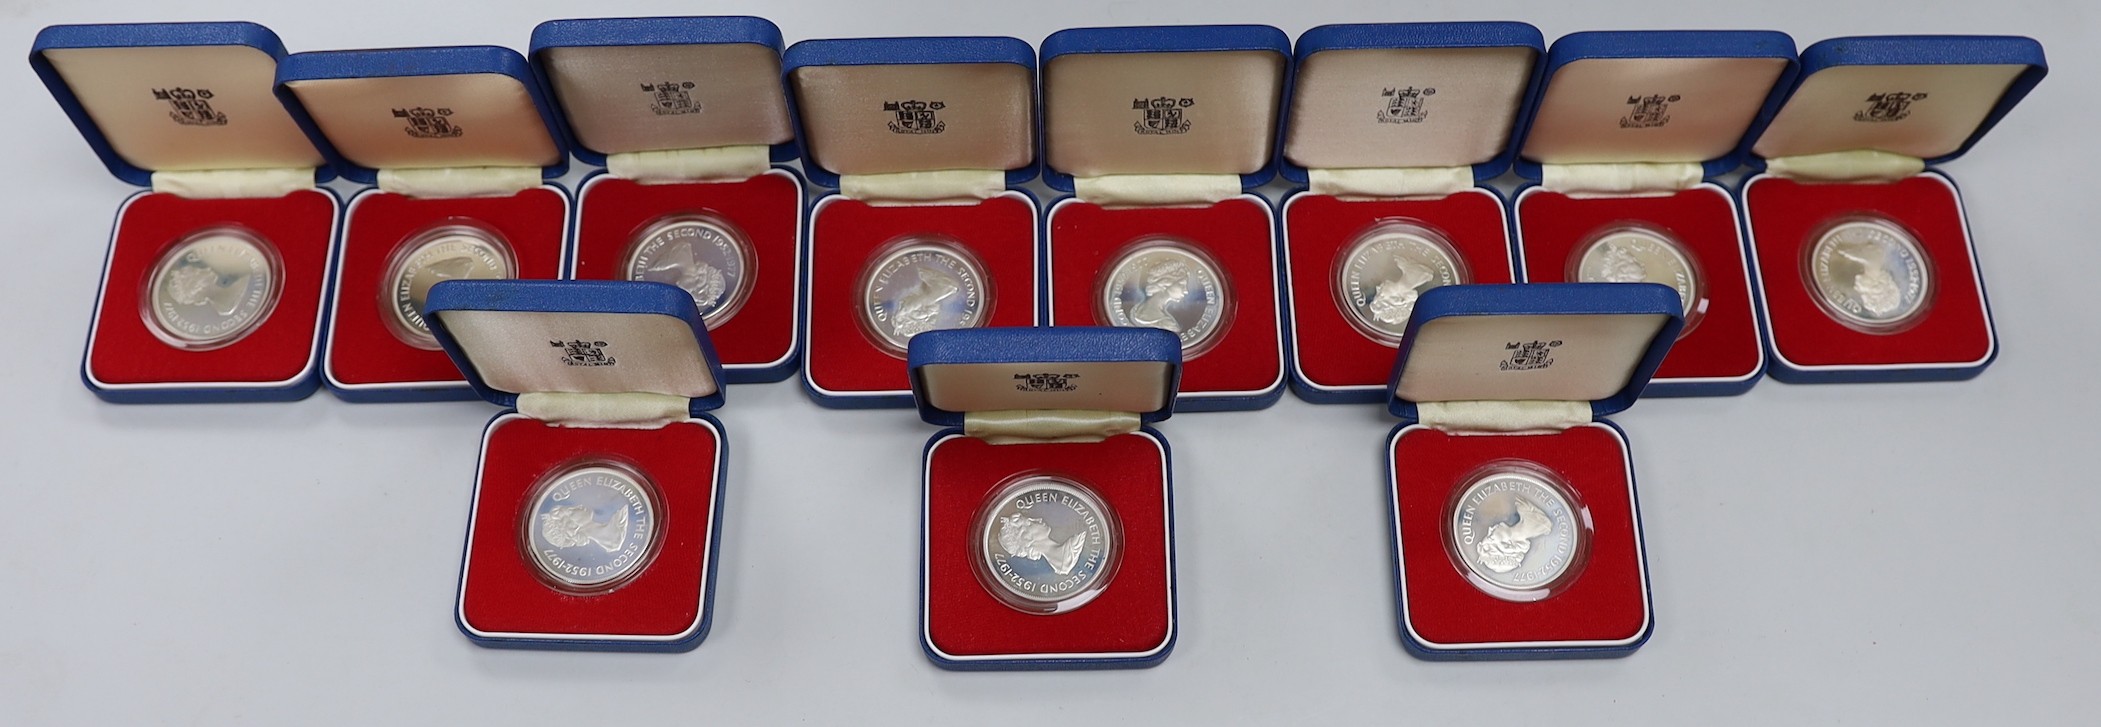 Eleven Royal Mint Commonwealth commemorative proof silver crowns                                                                                                                                                            